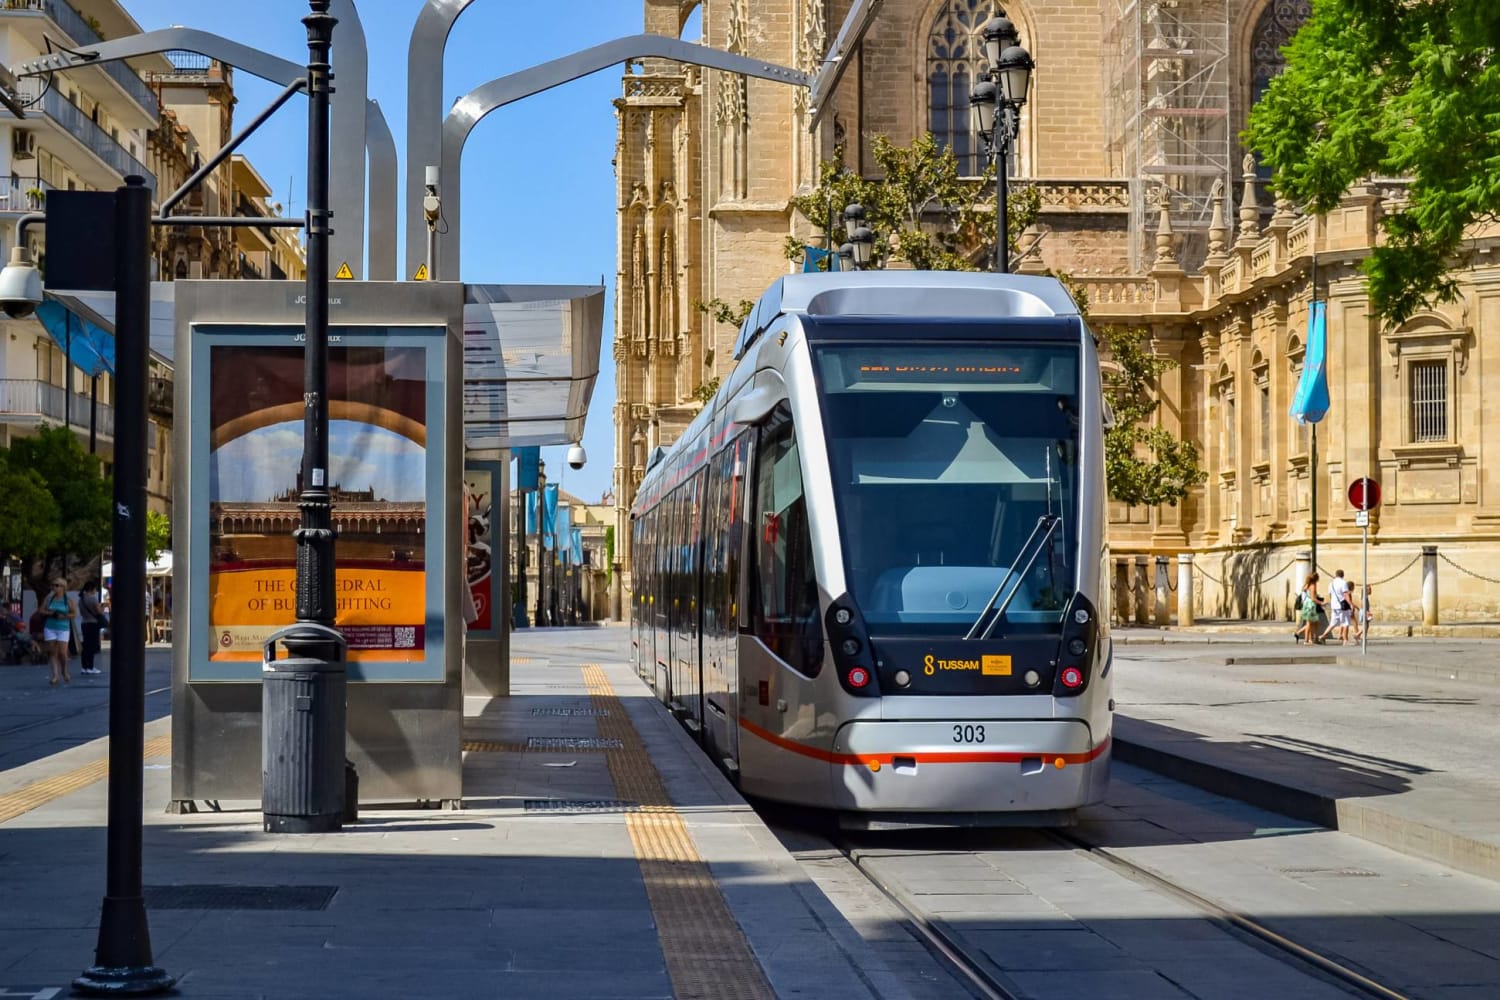 In pictures: Seville trams